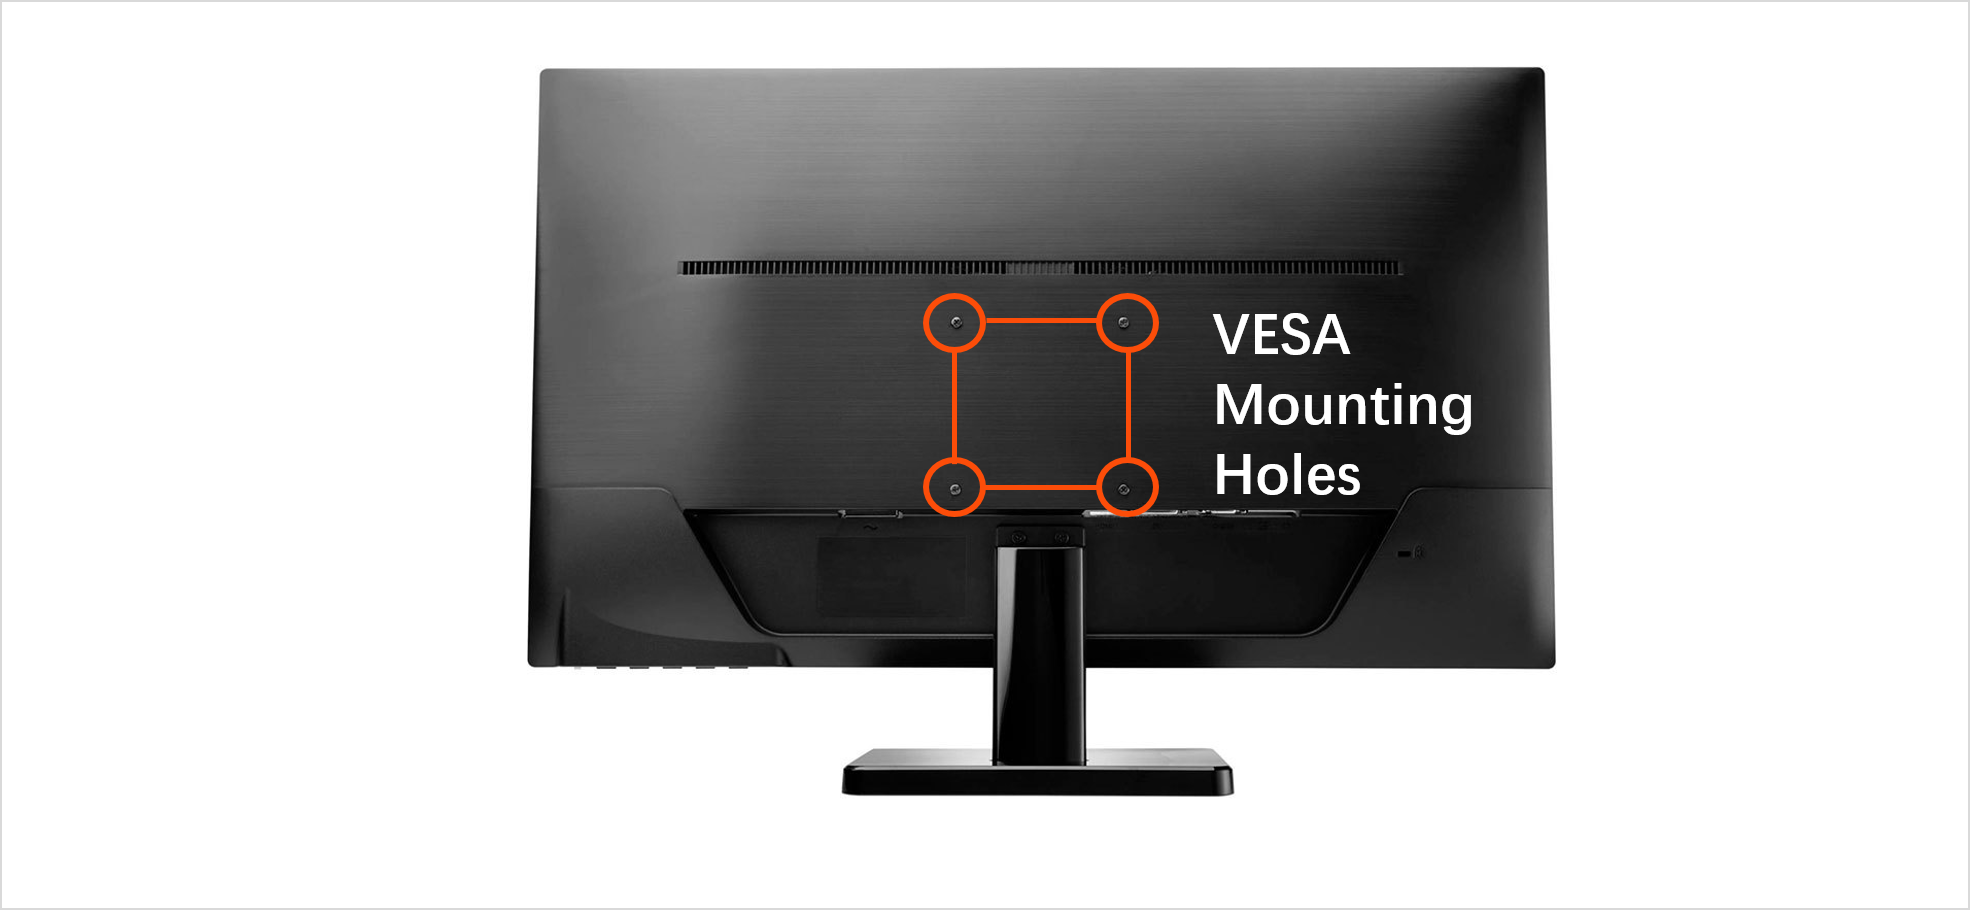 VESA Mounting Holes on the back of monitor